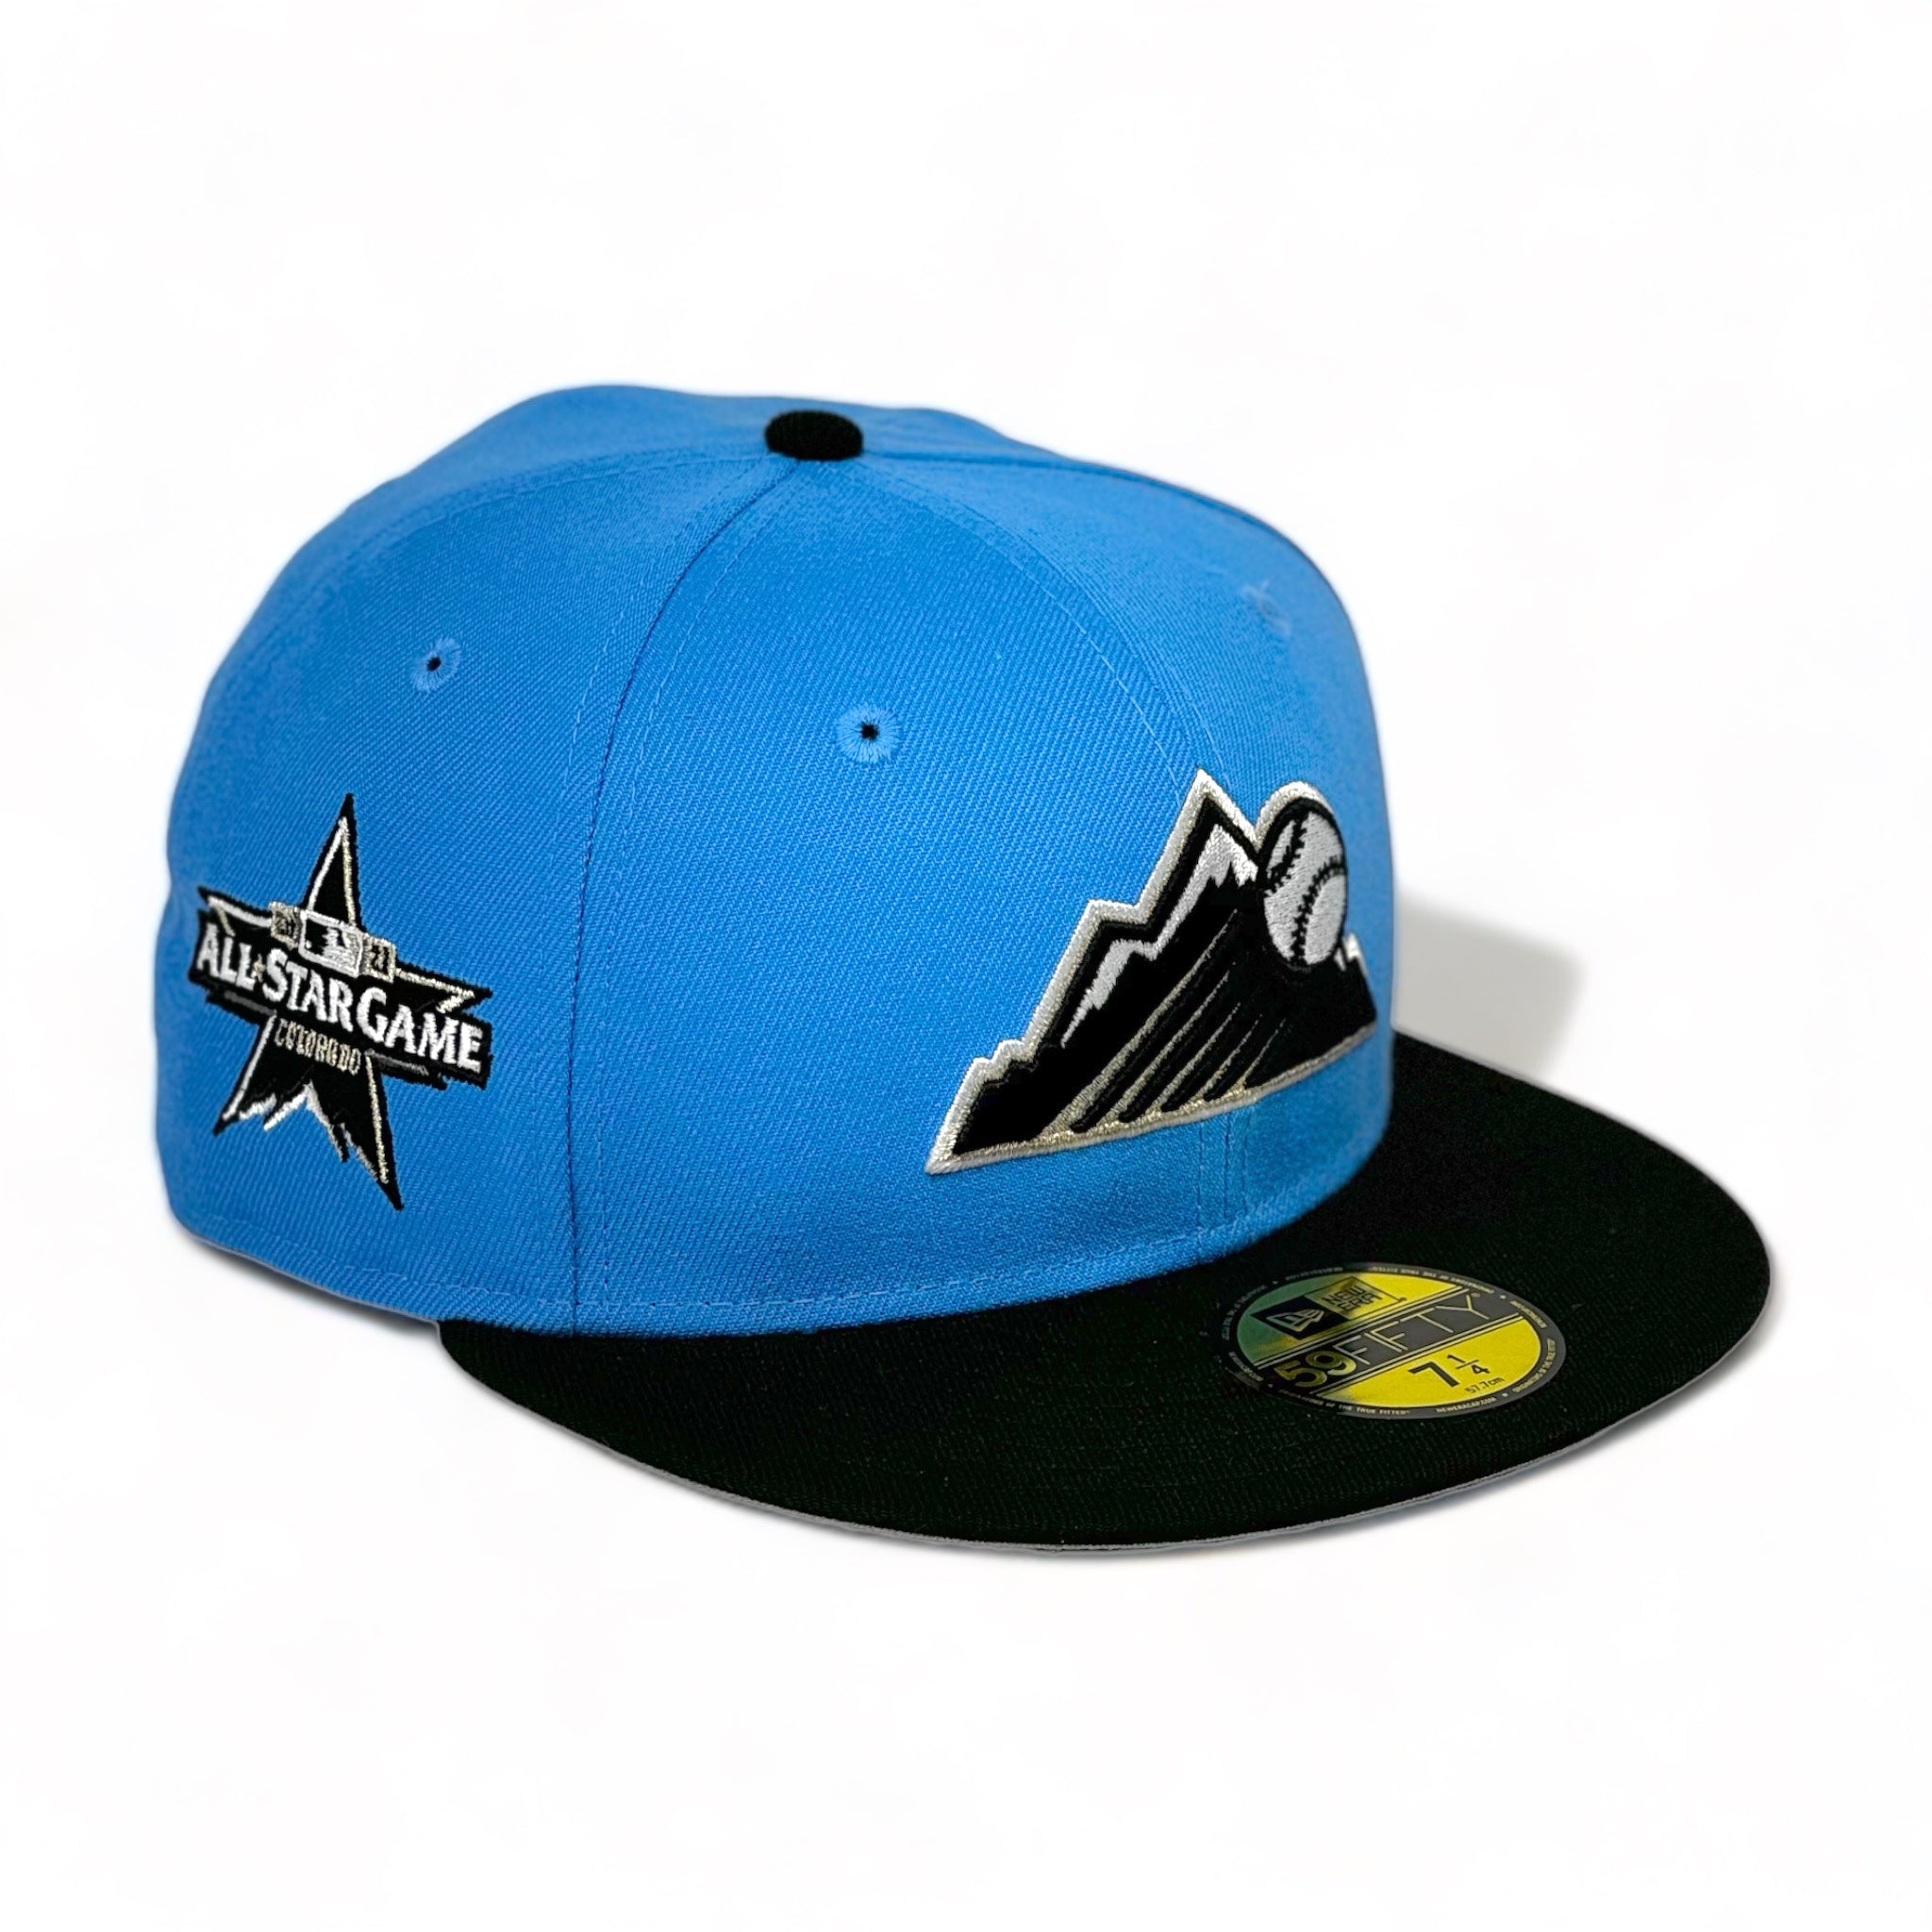 COLORADO ROCKIES (AF-BLUE) (2021 ALLSTARGAME) NEW ERA 59FIFTY FITTED